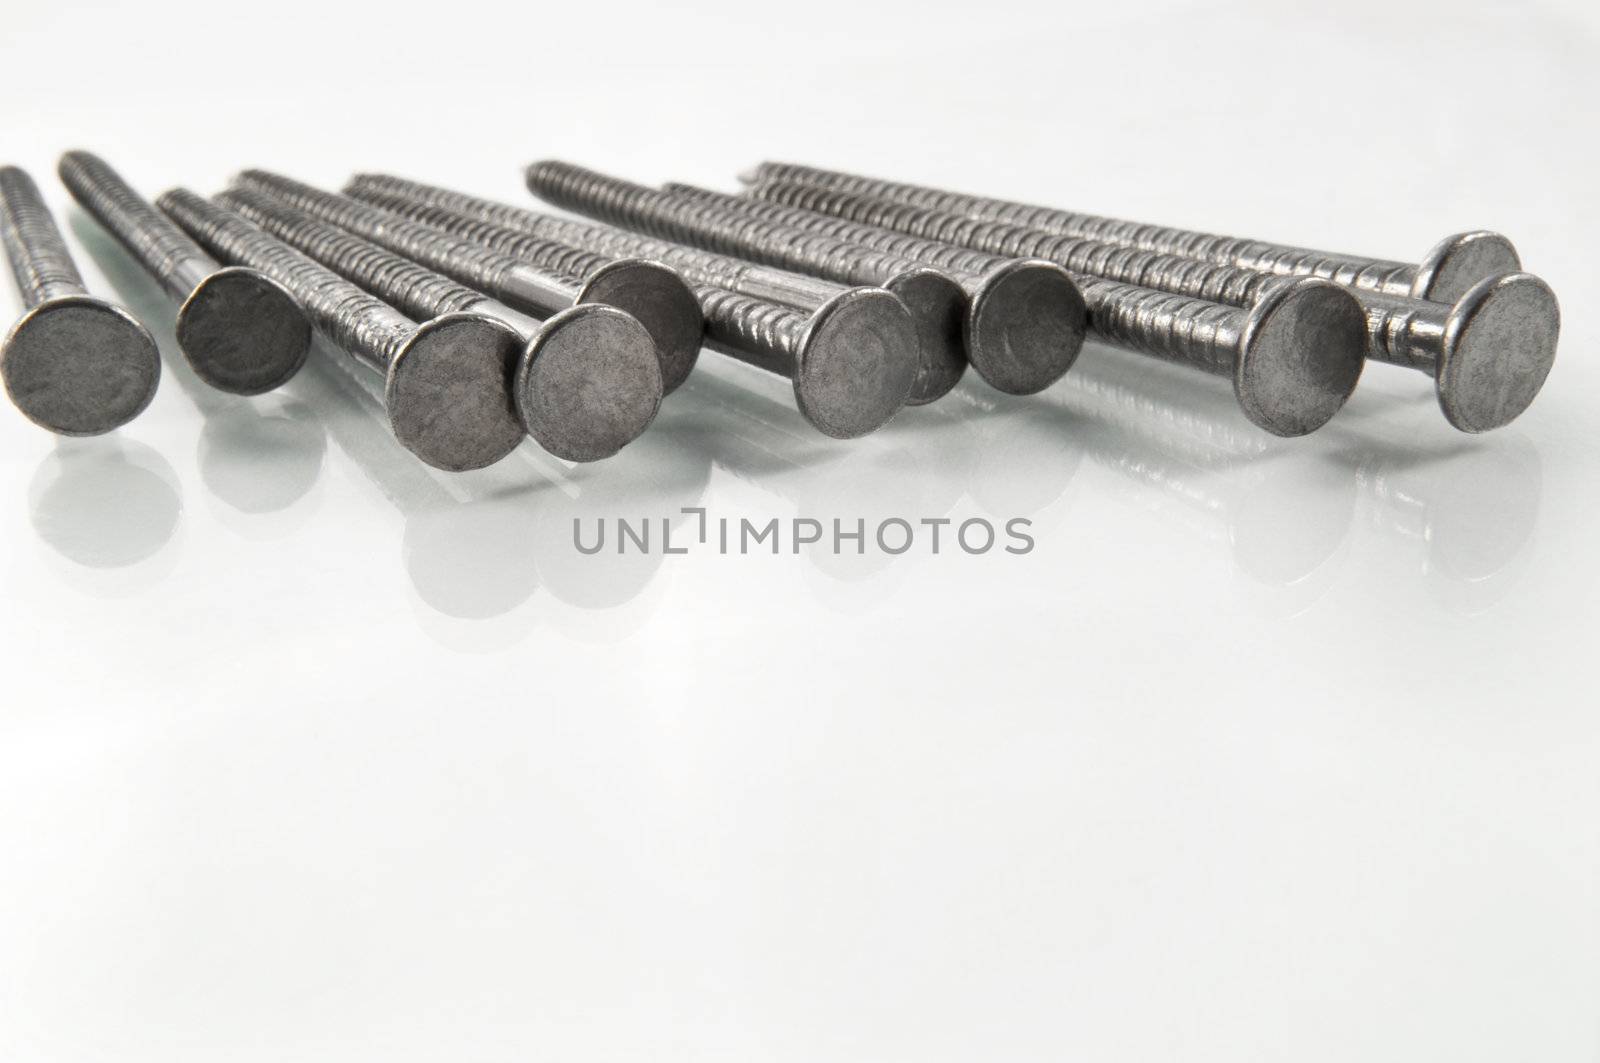 Close and low level angle of a group of steel nails arranged on white.